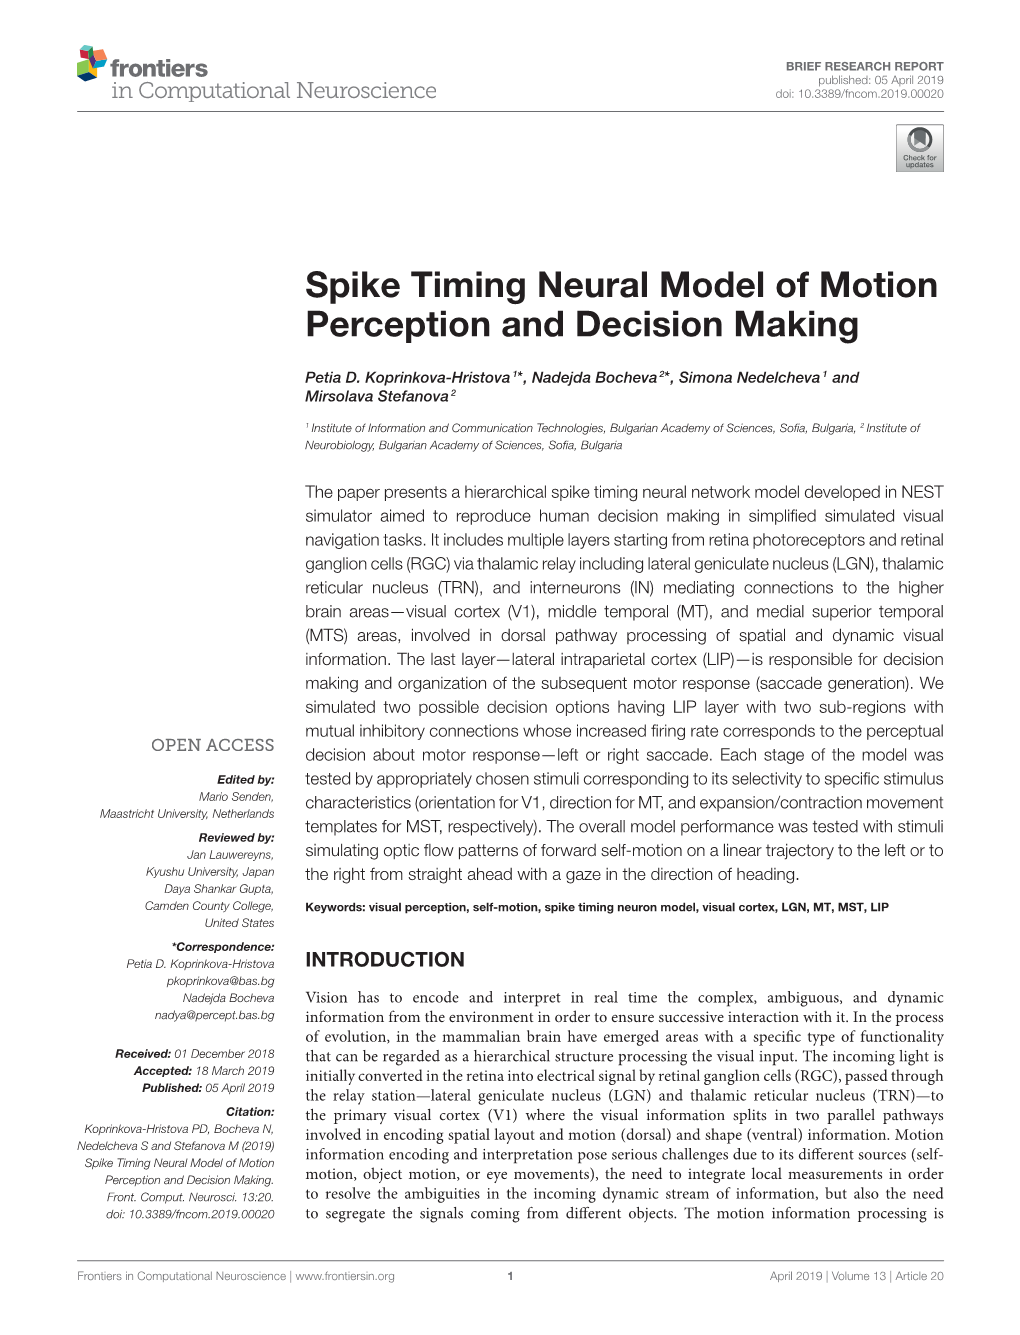 Spike Timing Neural Model of Motion Perception and Decision Making